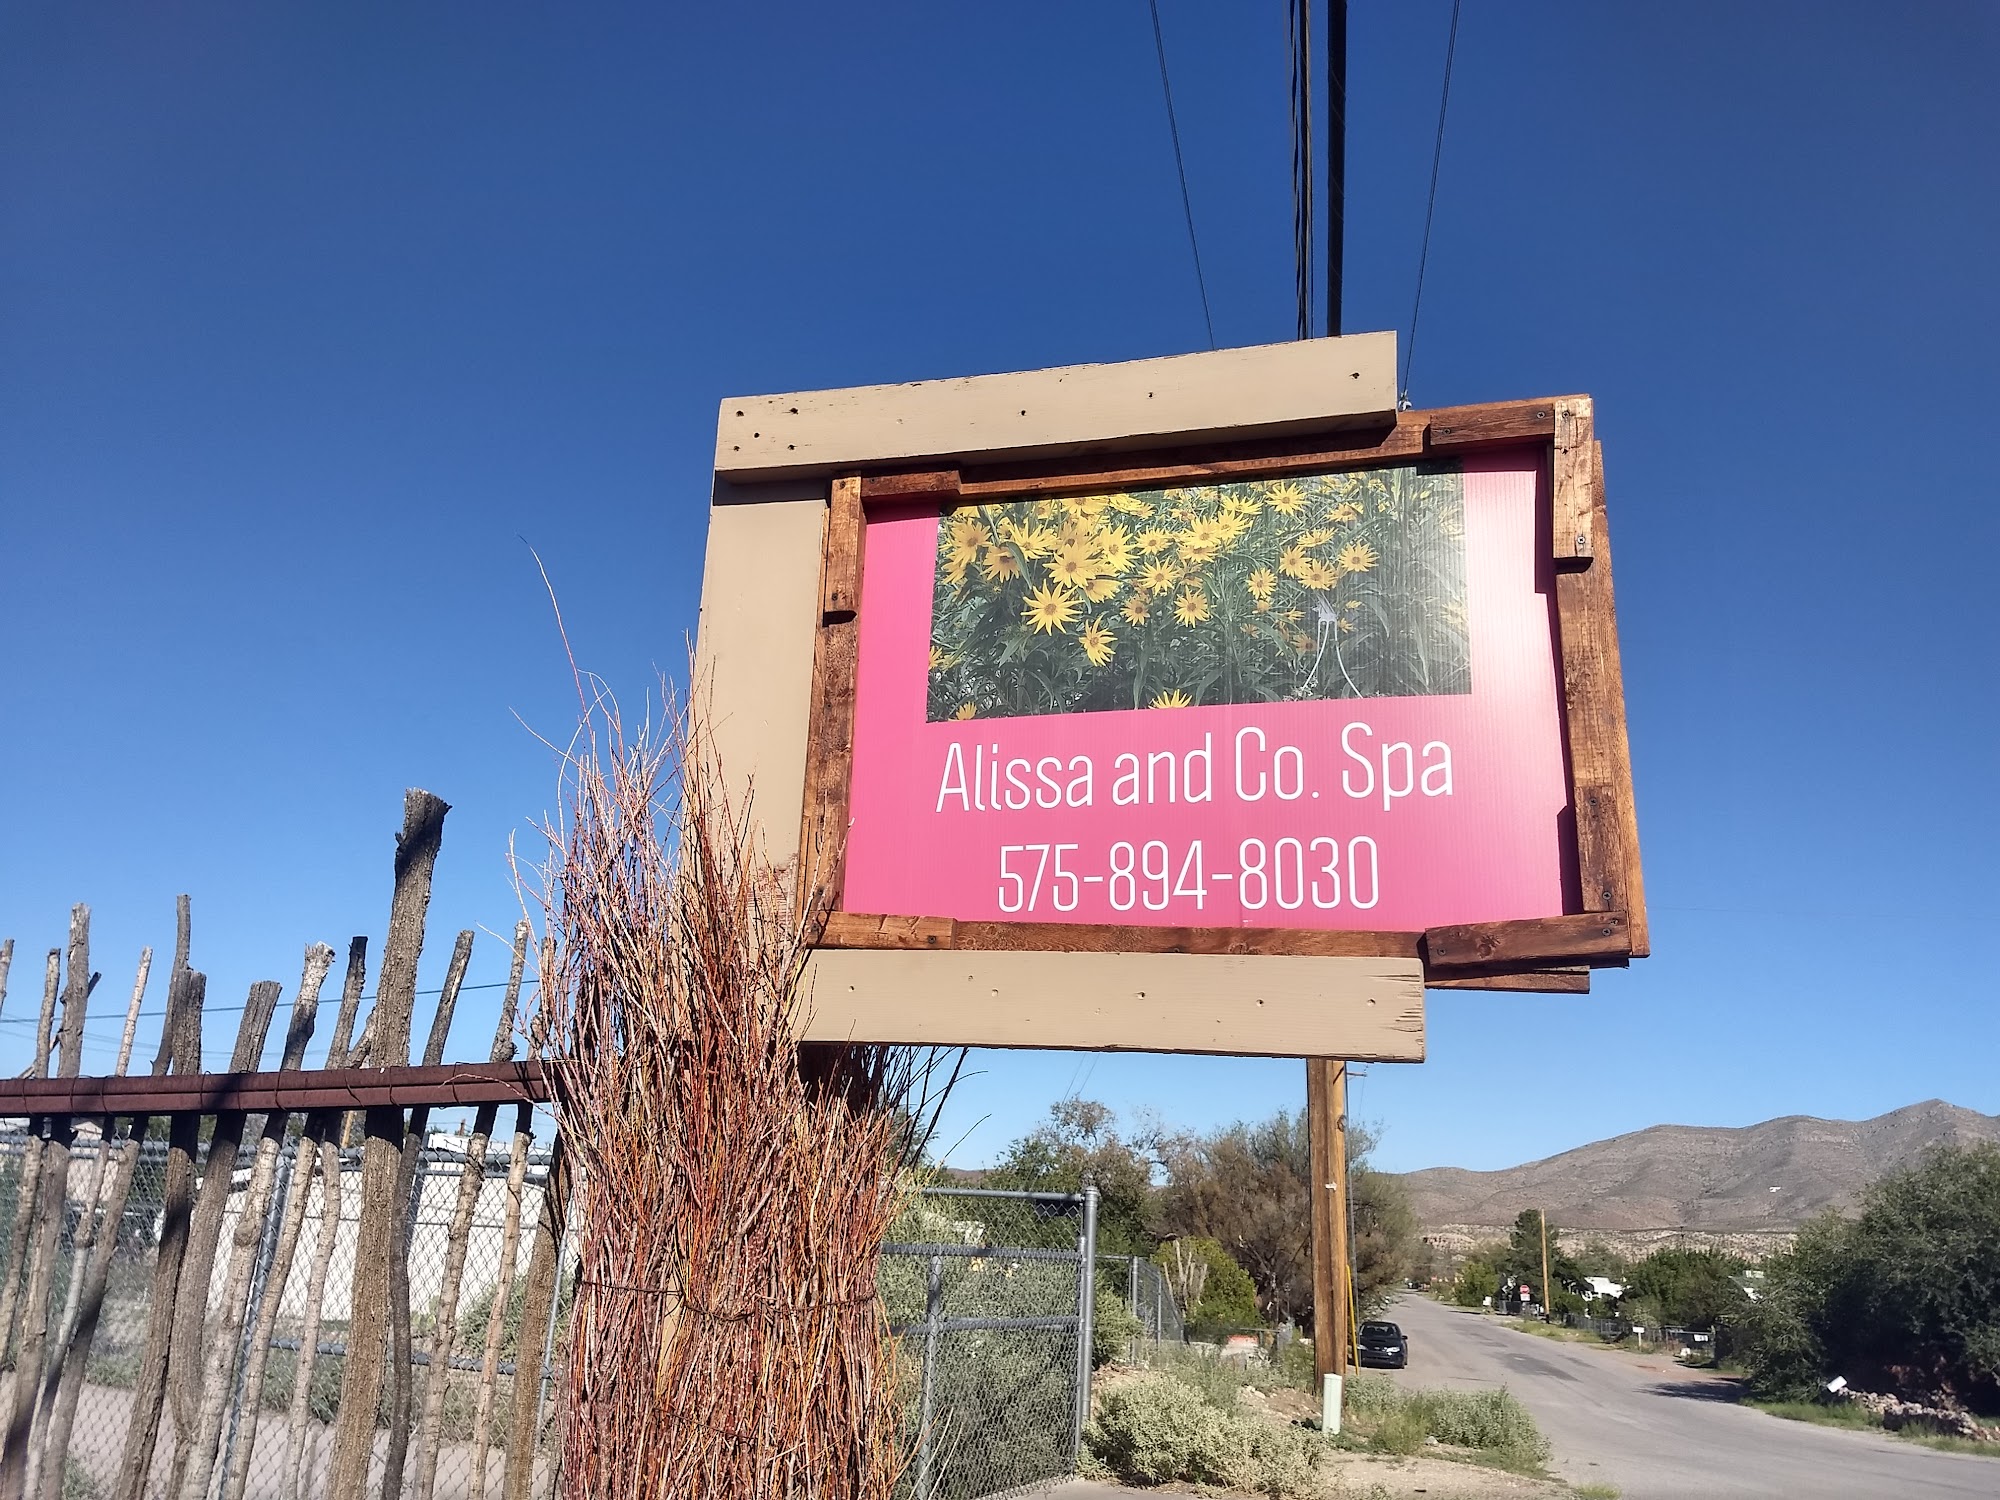 Alissa & Company Spa 1000 Locust St, Truth or Consequences New Mexico 87901